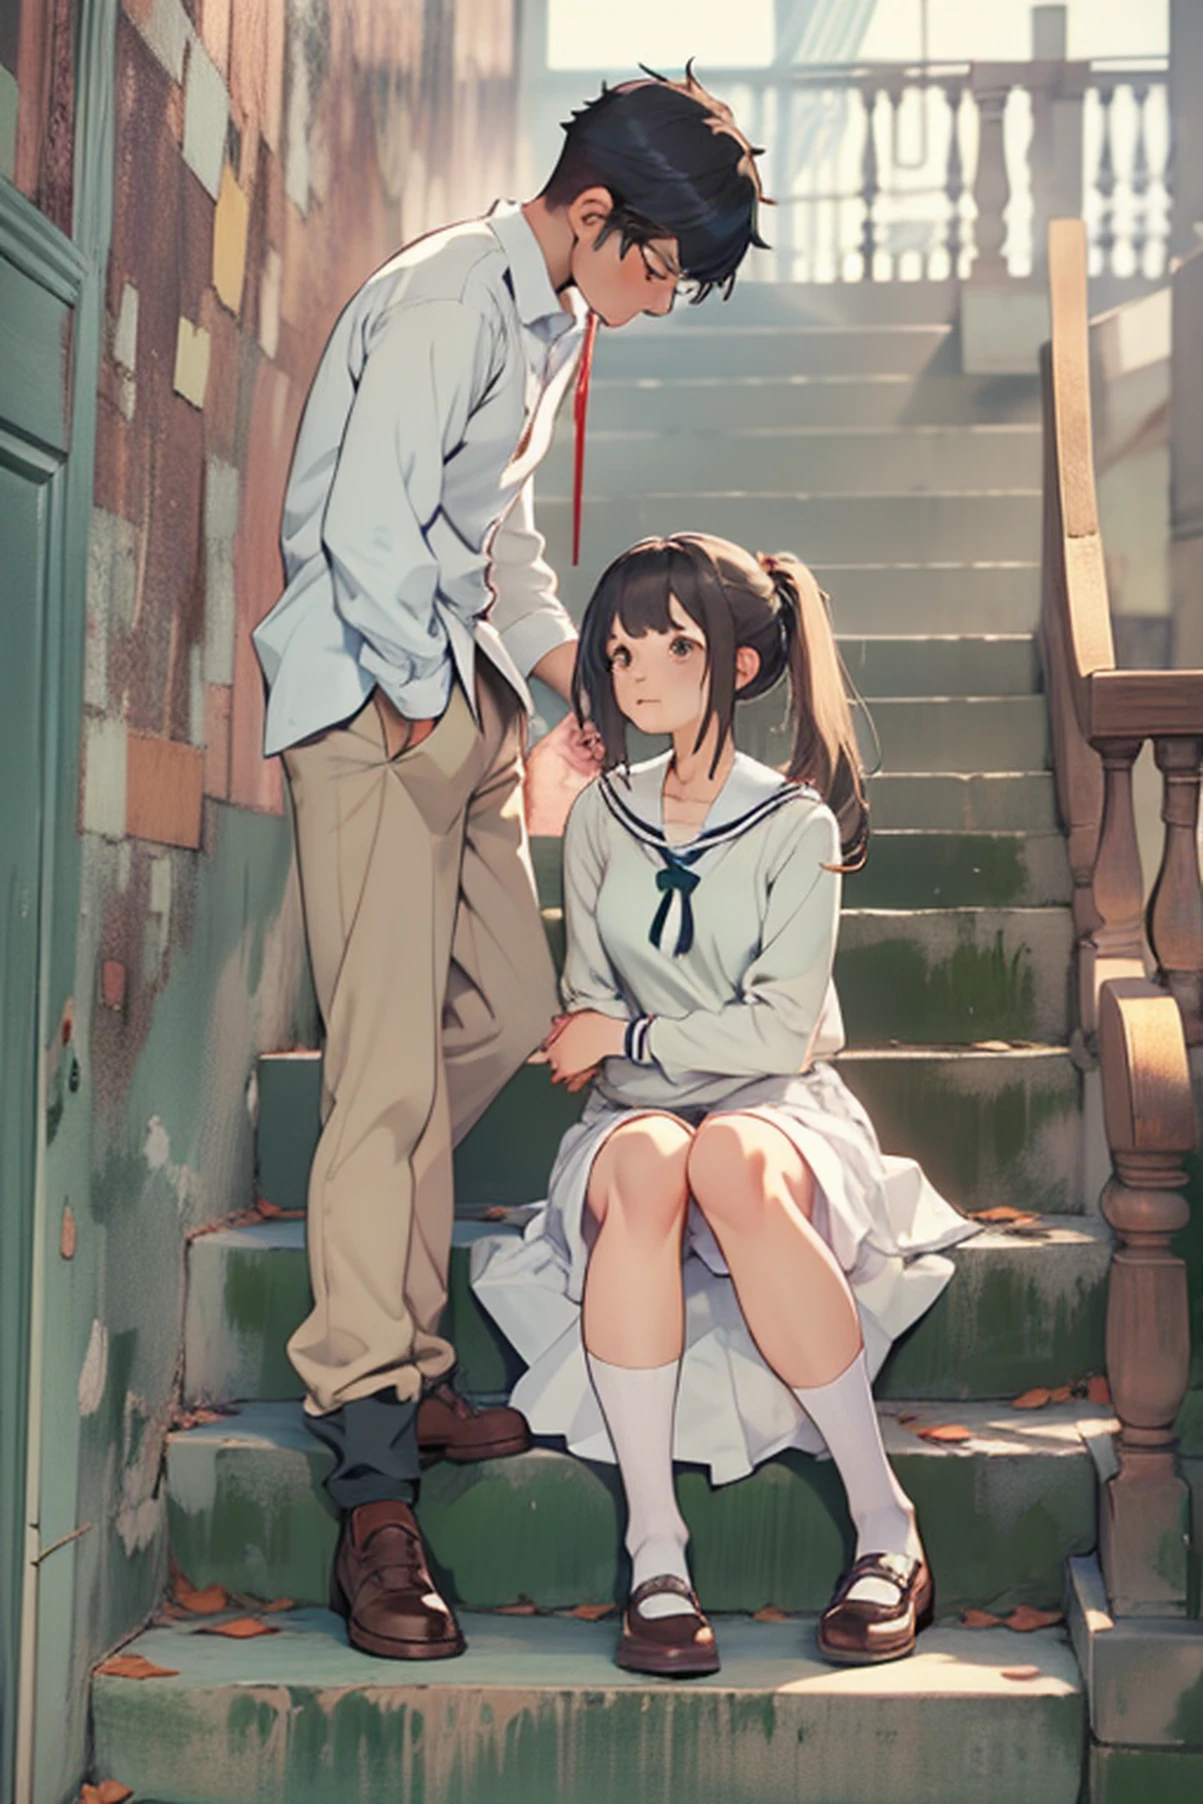 {{Male and female couples}}、Stairs in the house、sitting on stairs、Girl in white blouse and tight skirt、Man's cold gaze、Boys' 、Put your hands around your waist